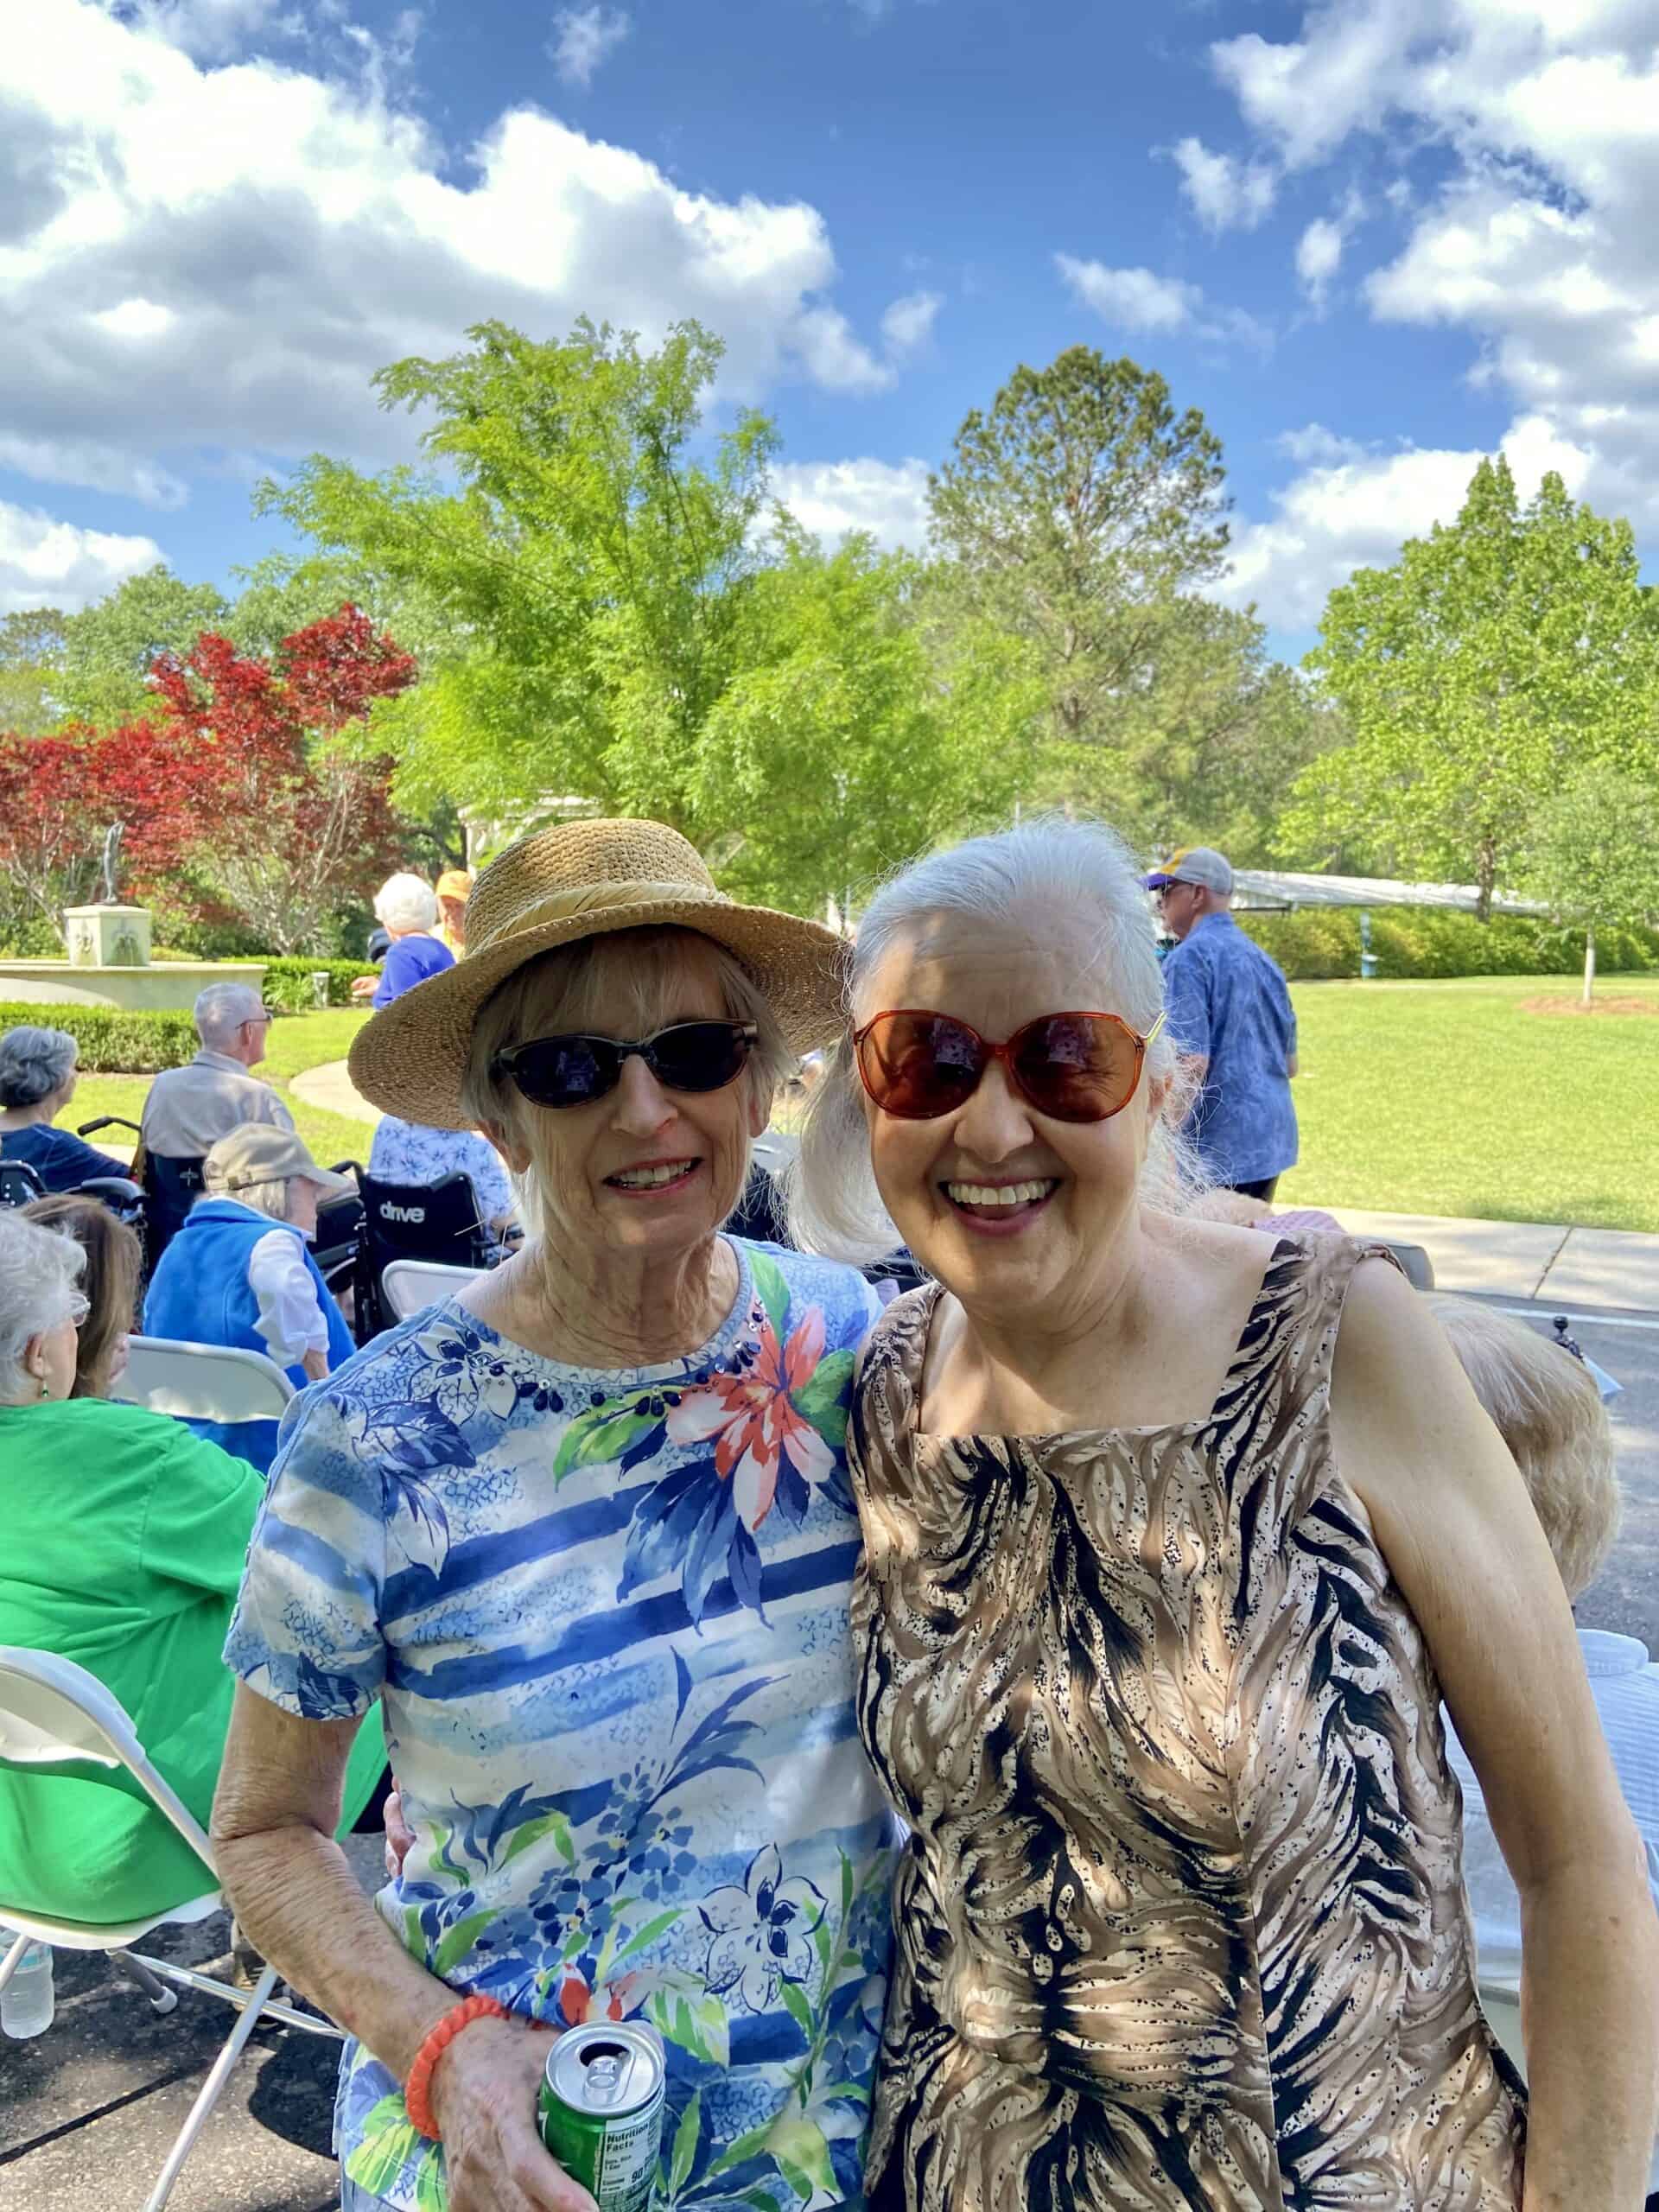 One of the Key Benefits of Living in a Retirement Community: Plentiful Opportunities to Make New Friends